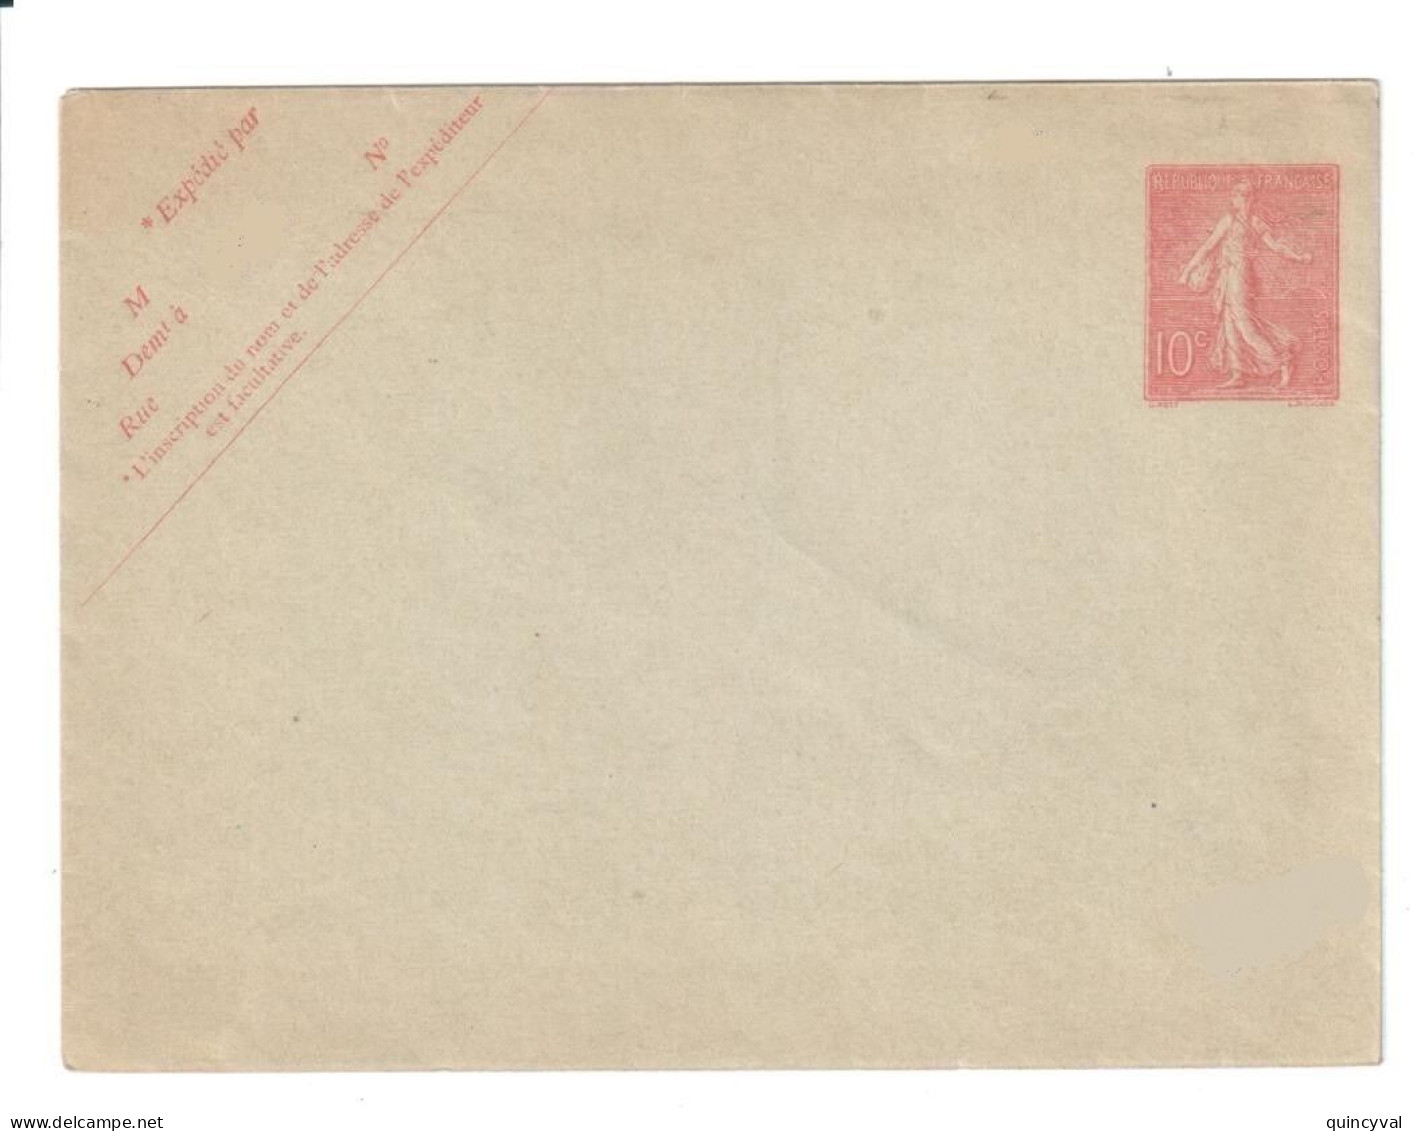 Entier Postal Enveloppe Entier 10c Semeuse Lignée 123 X 96 Storch Mill 610 A11 Yv 138-E1 - Standard Covers & Stamped On Demand (before 1995)